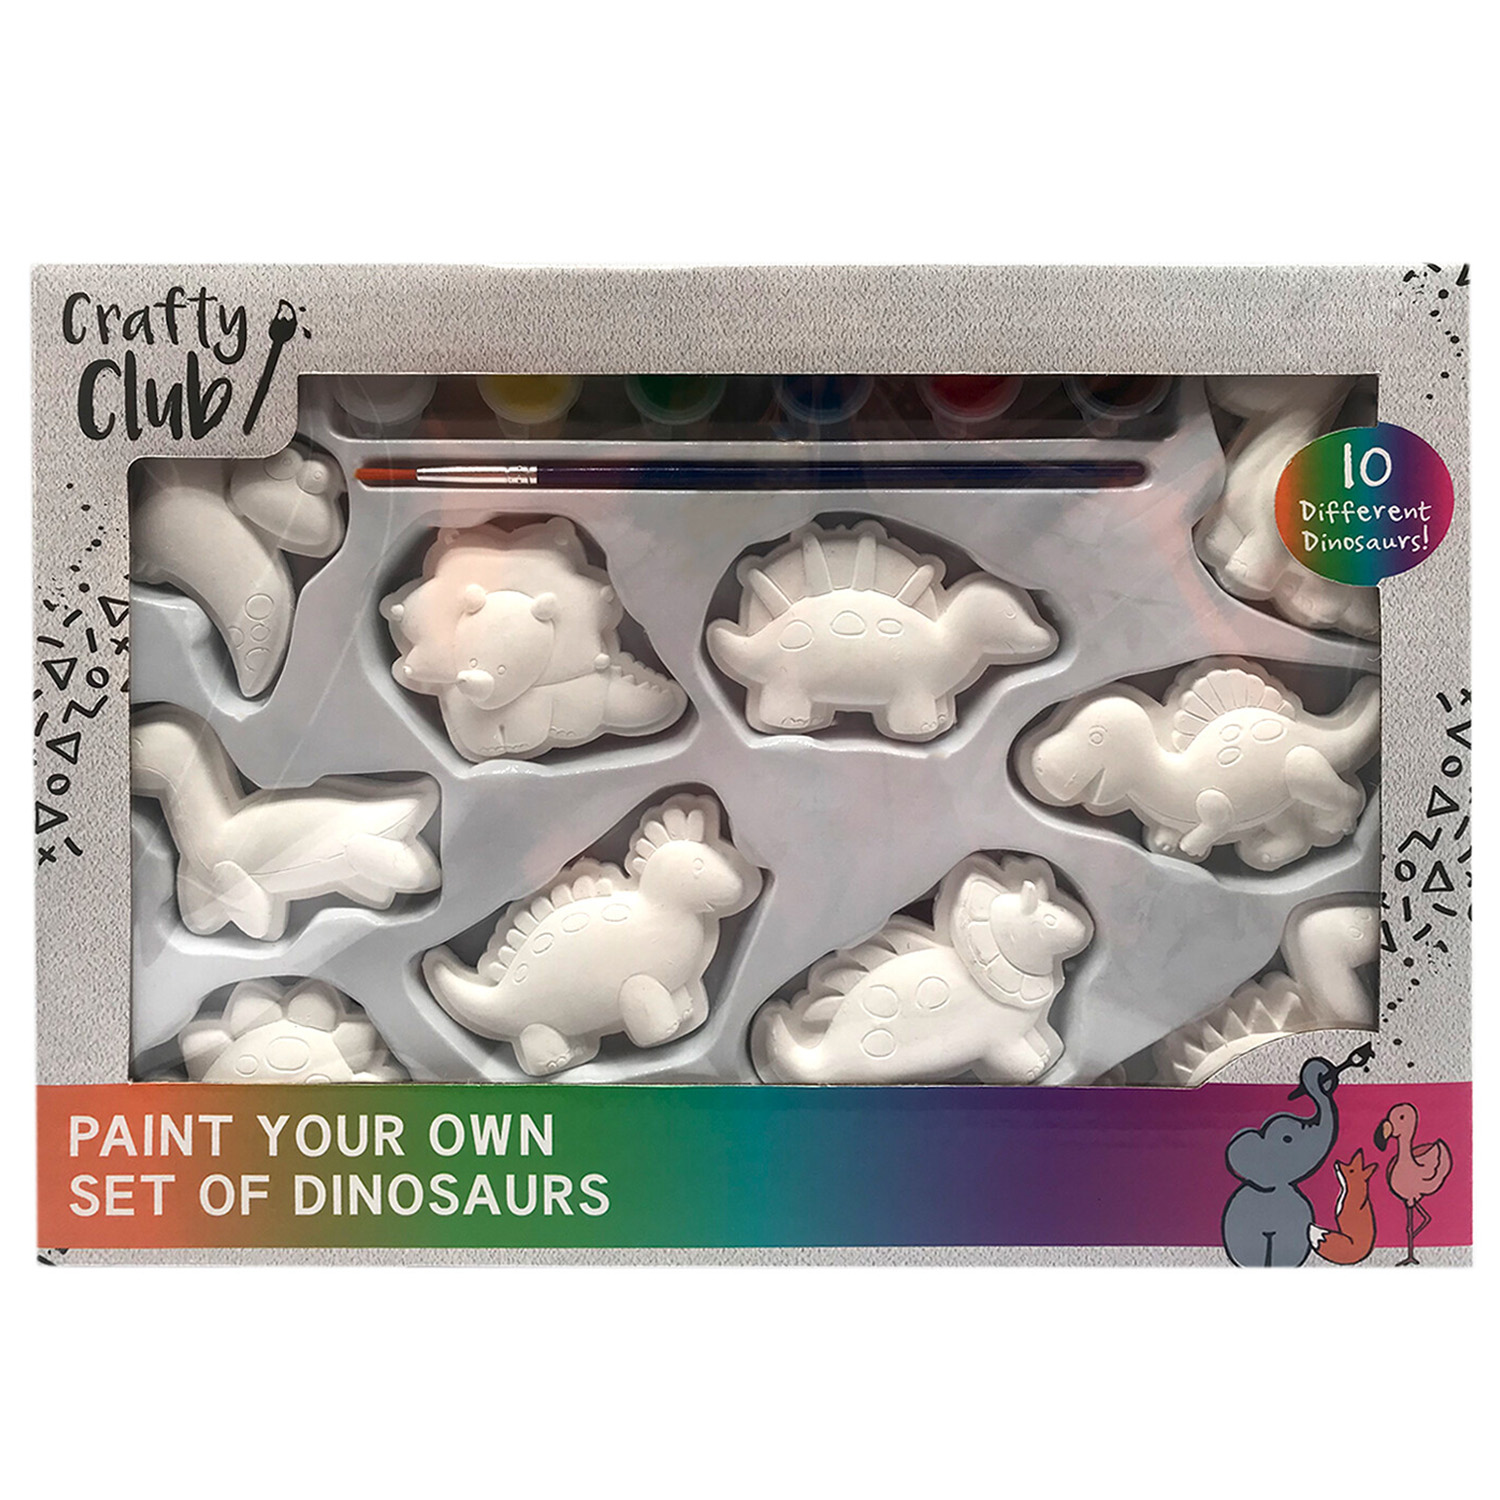 Crafty Club Paint Your Own Dinosaurs Plaster Figures Set 10 Pack Image